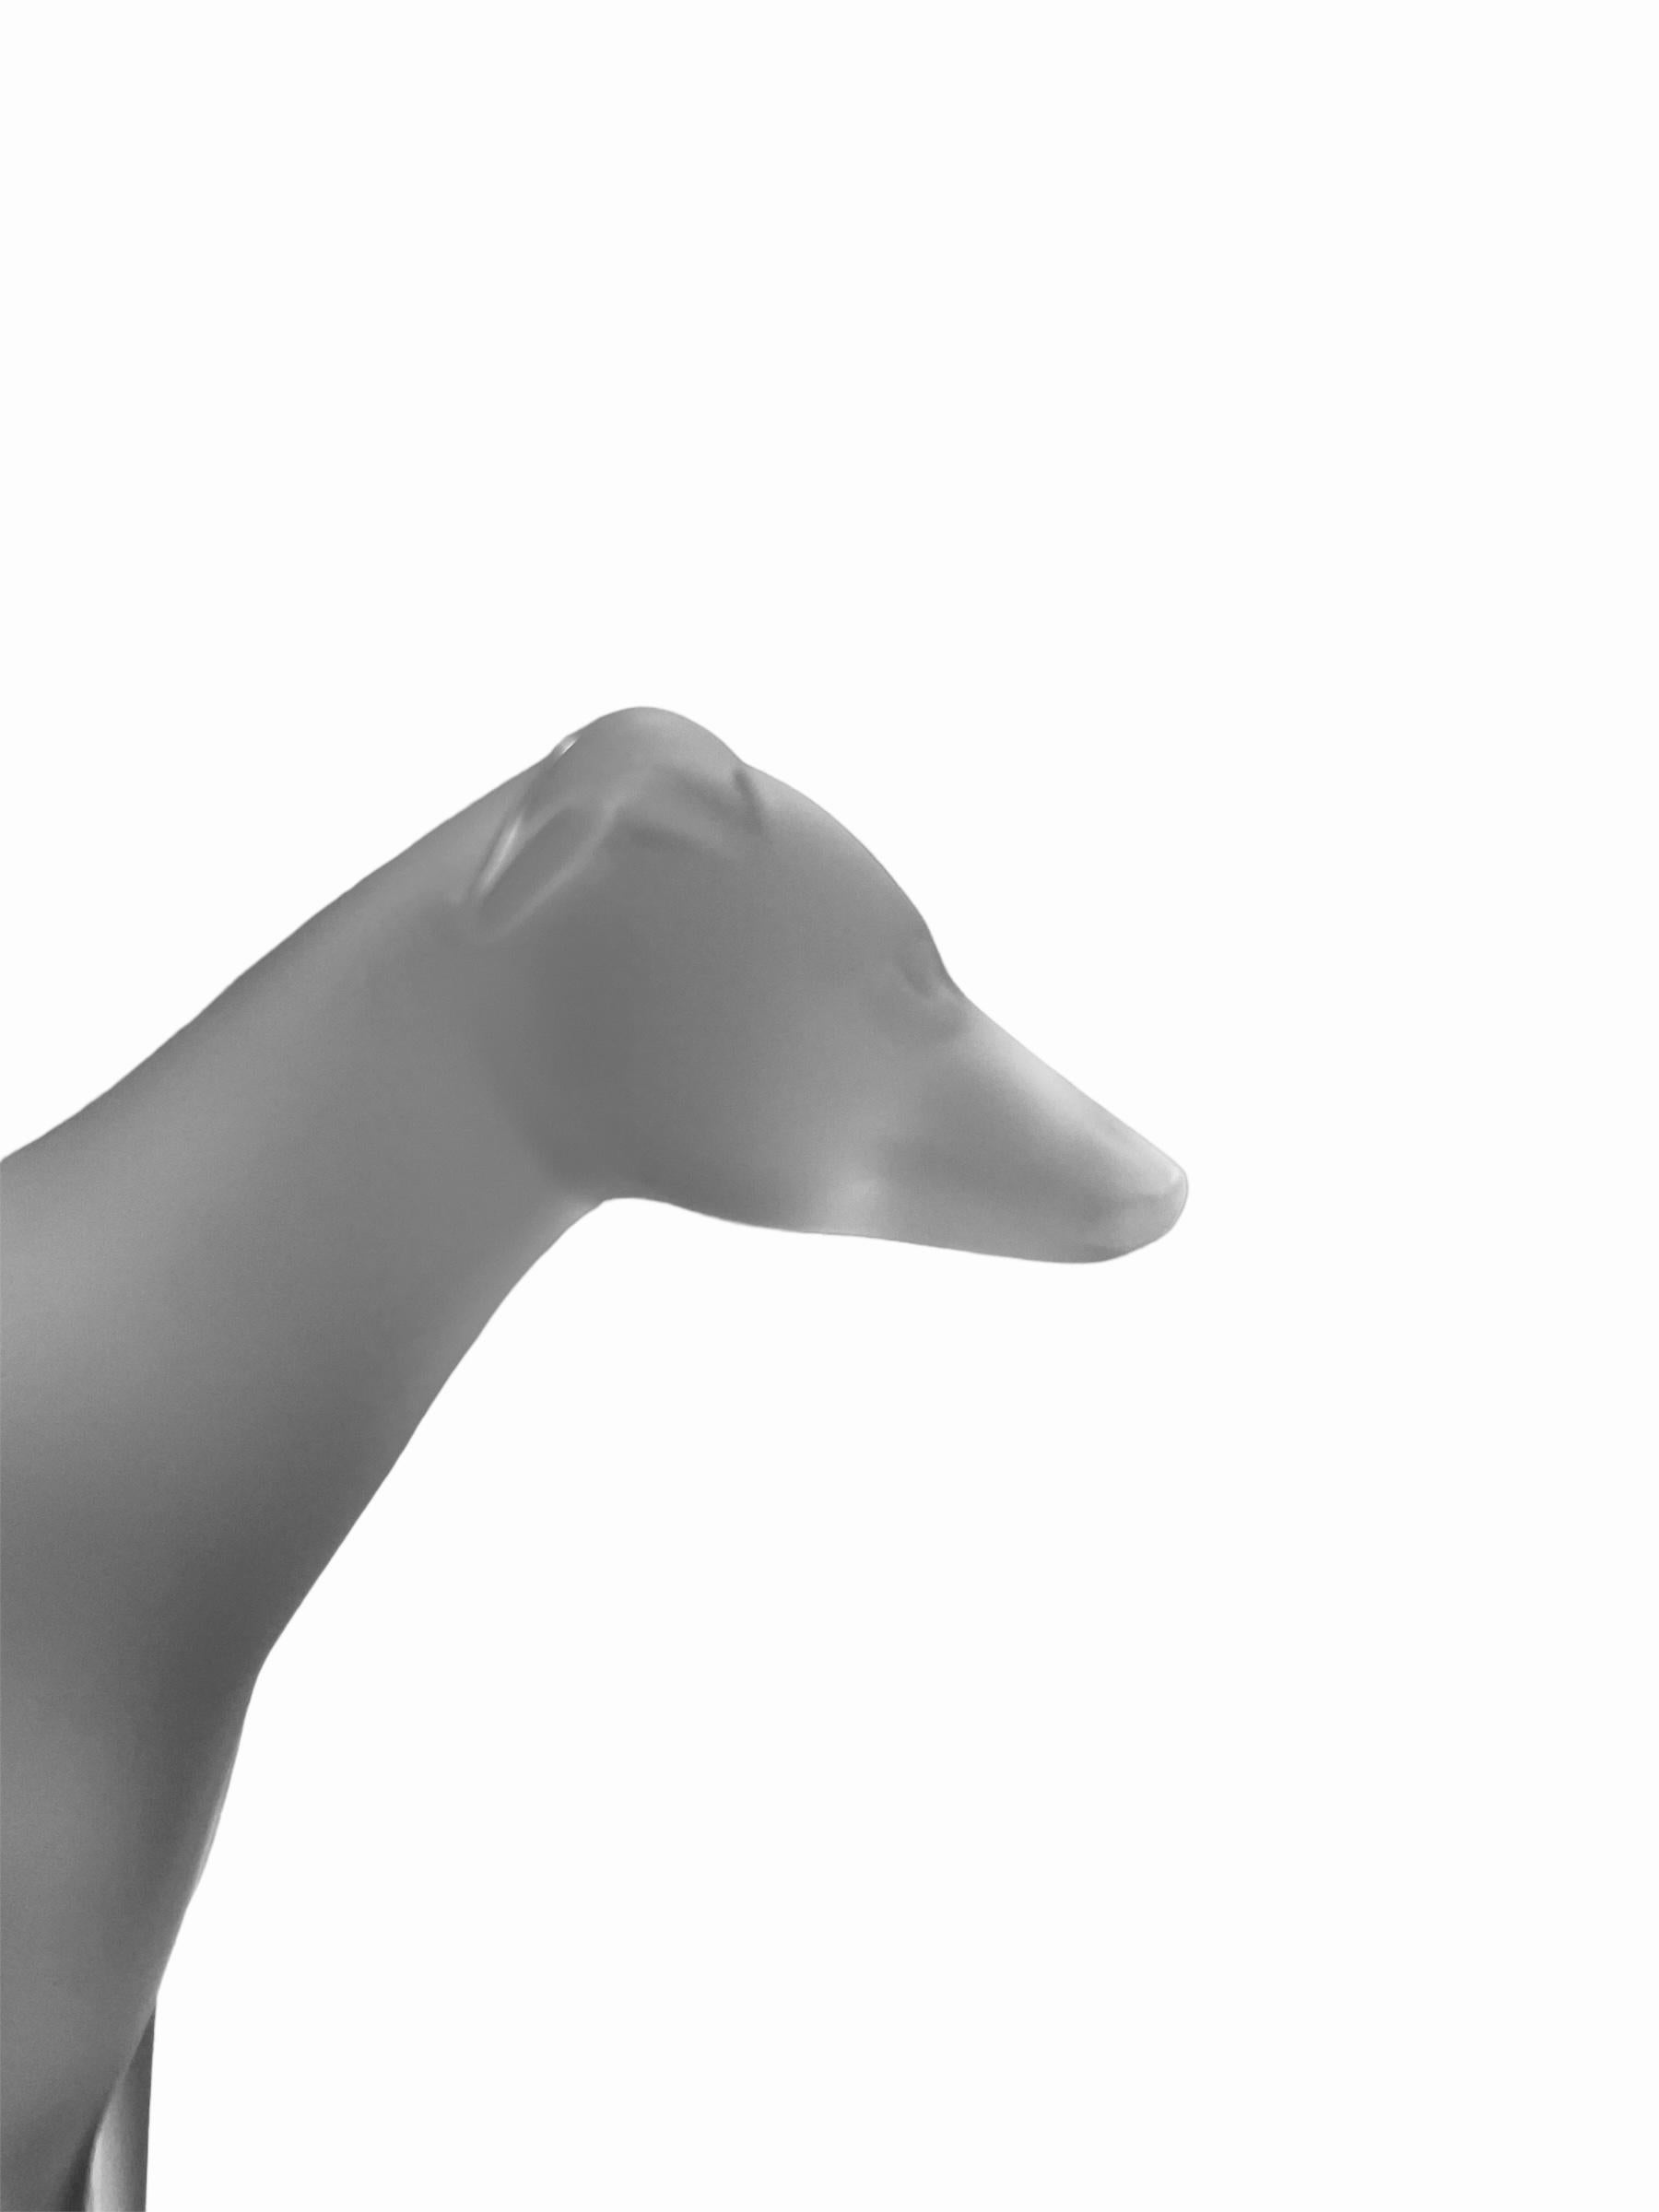 Lalique France Frosted Crystal “Perceval” Greyhound Sculpture  In Good Condition For Sale In Guaynabo, PR